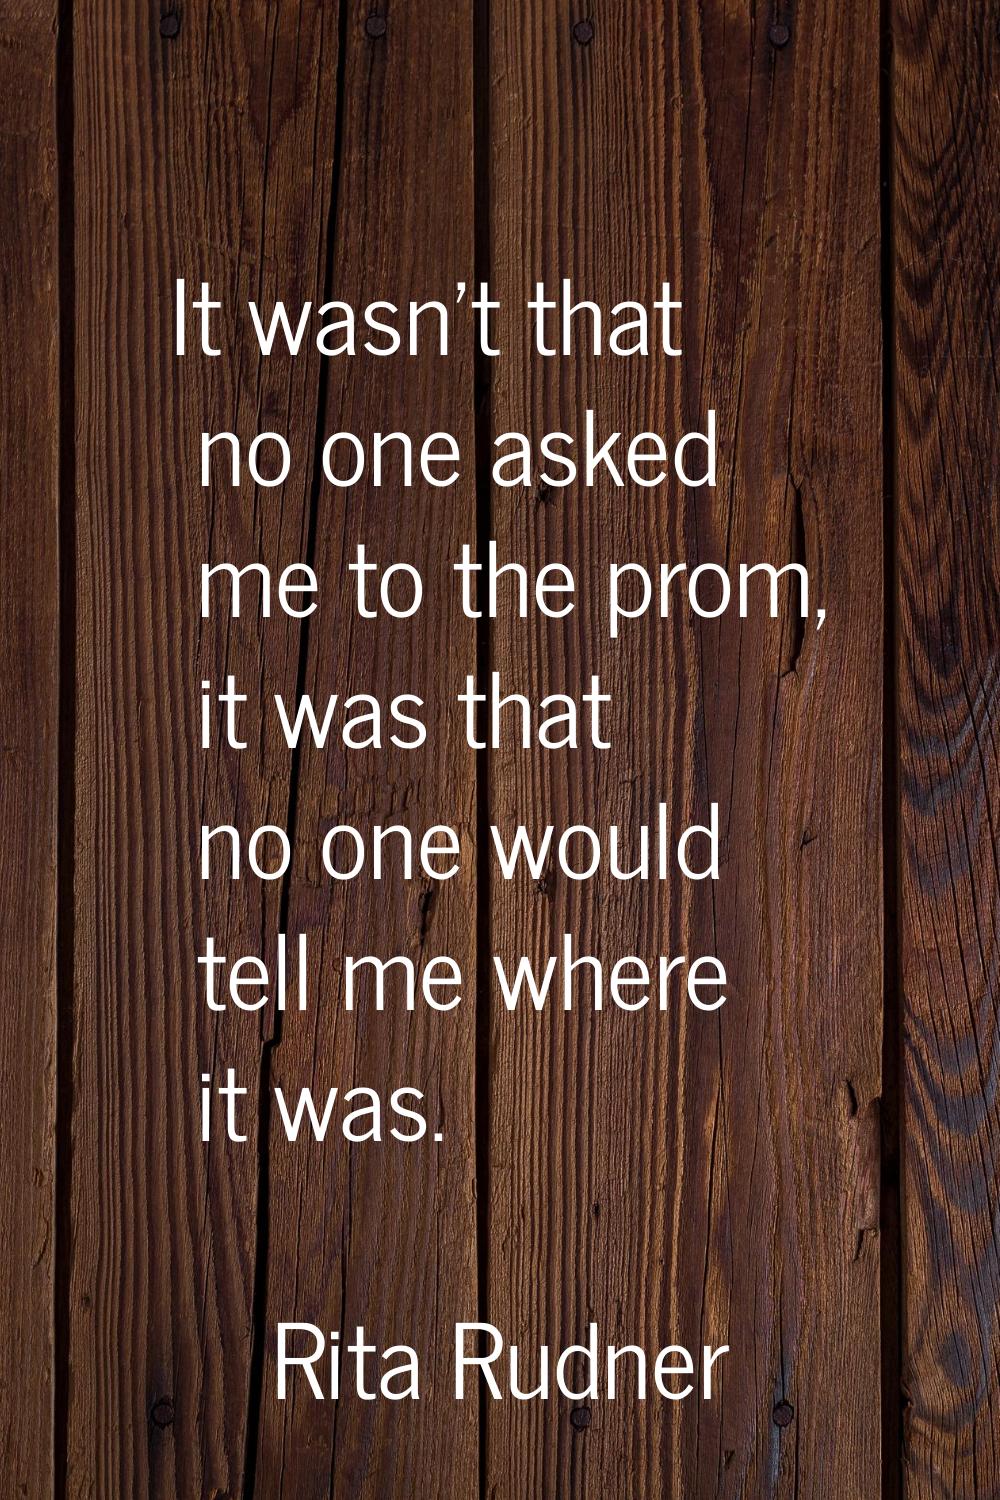 It wasn't that no one asked me to the prom, it was that no one would tell me where it was.